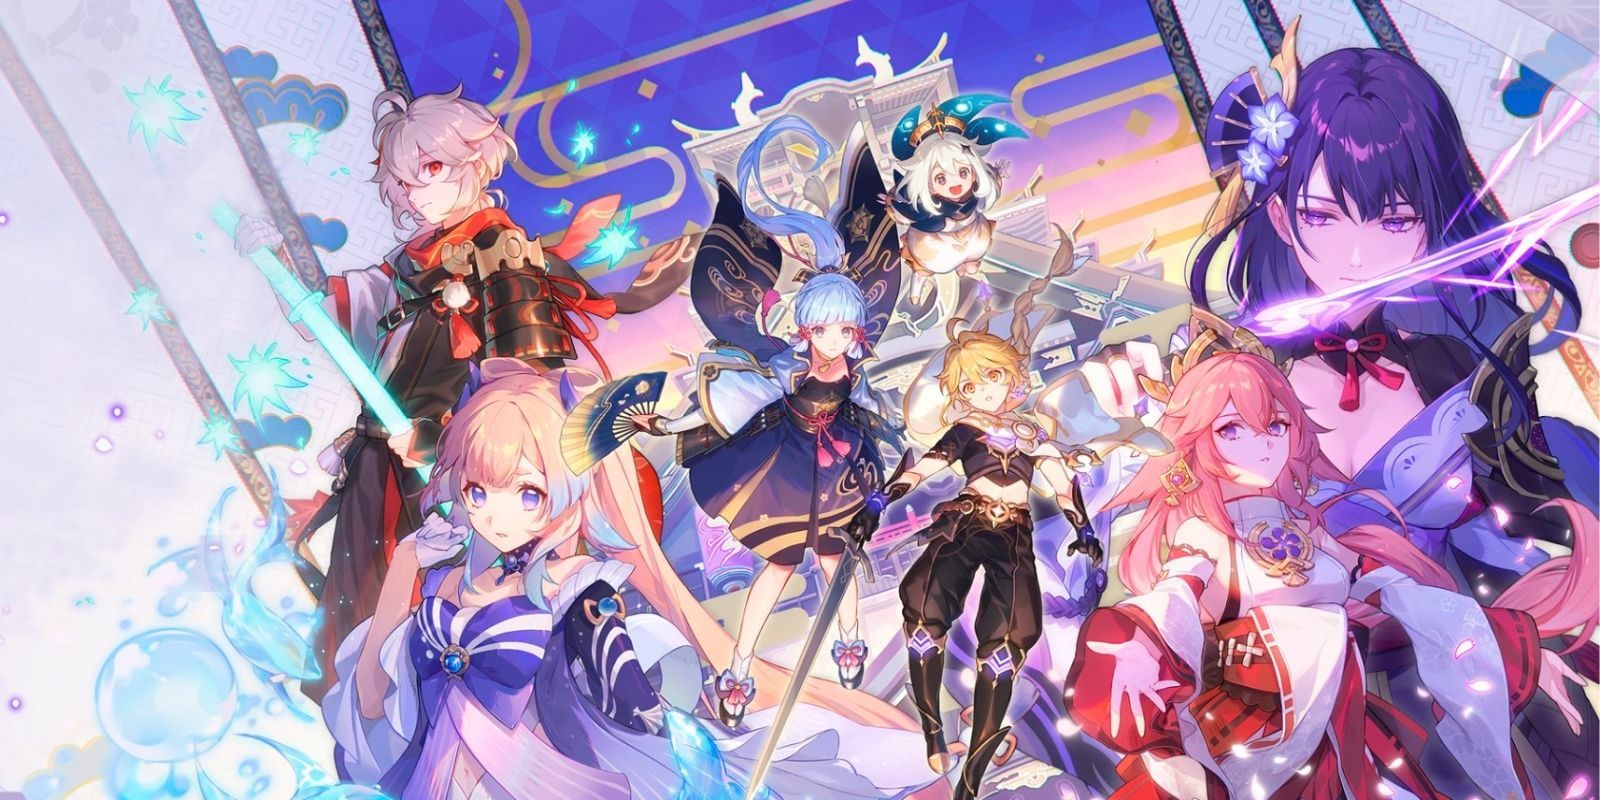 Genshin Update  on X: Hello Travelers, Here's what's currently available  on Paimon's Bargains: ✓ Ningguang ✓ Xingqiu ✓ Blackcliff Weapon Series Not  gonna lie, the banner 4 stars and shop characters